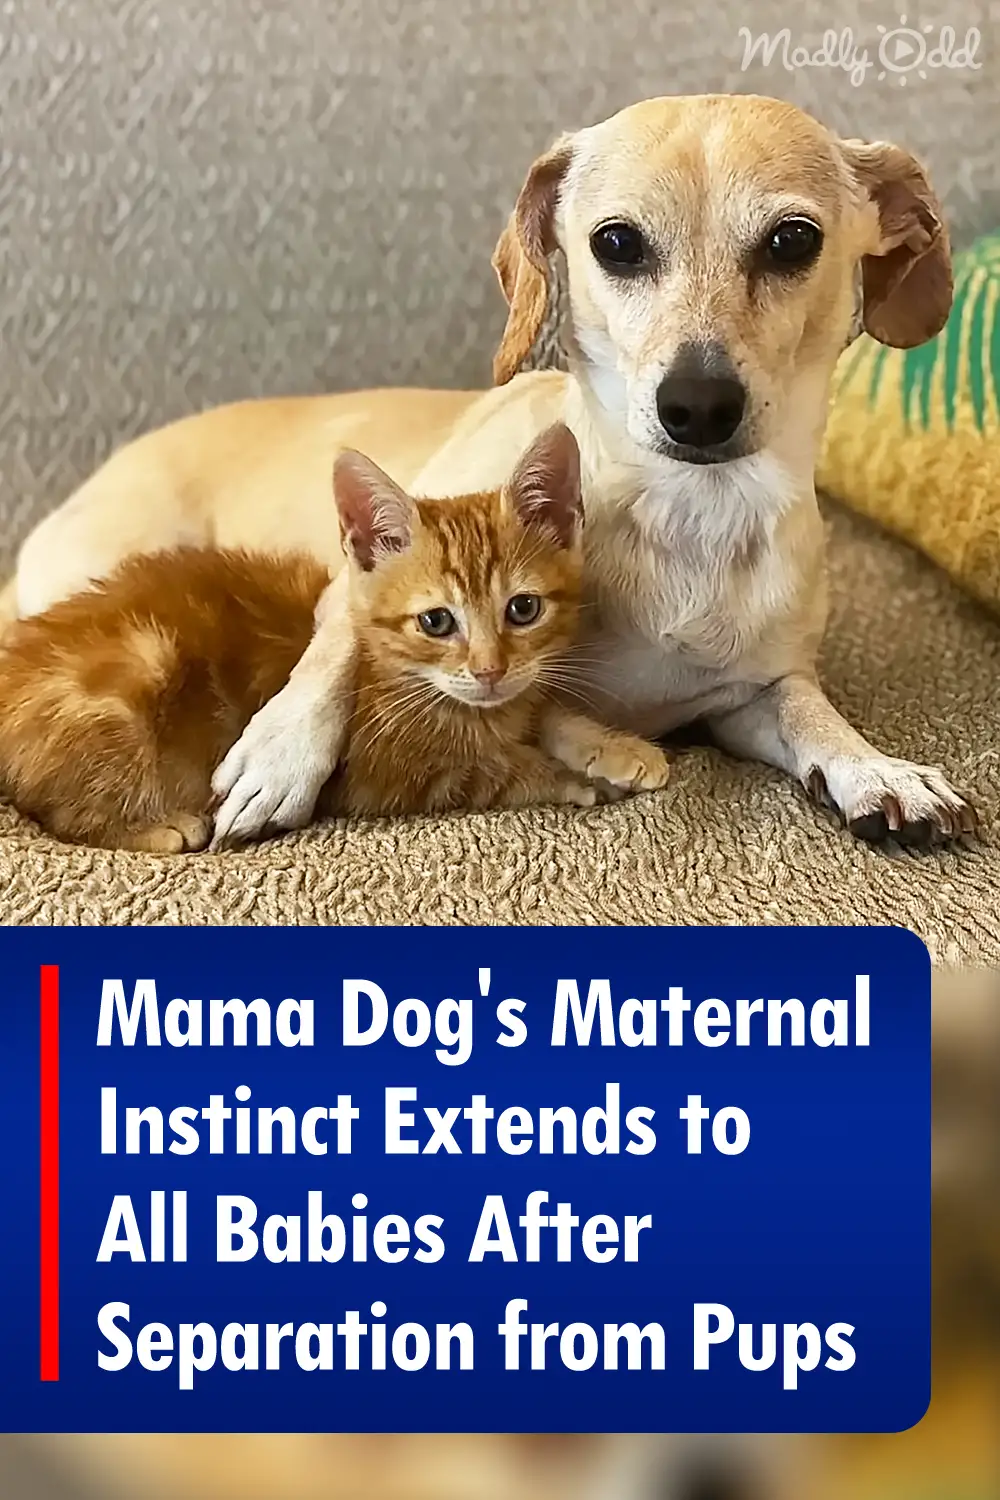 Mama Dog's Maternal Instinct Extends to All Babies After Separation from Pups